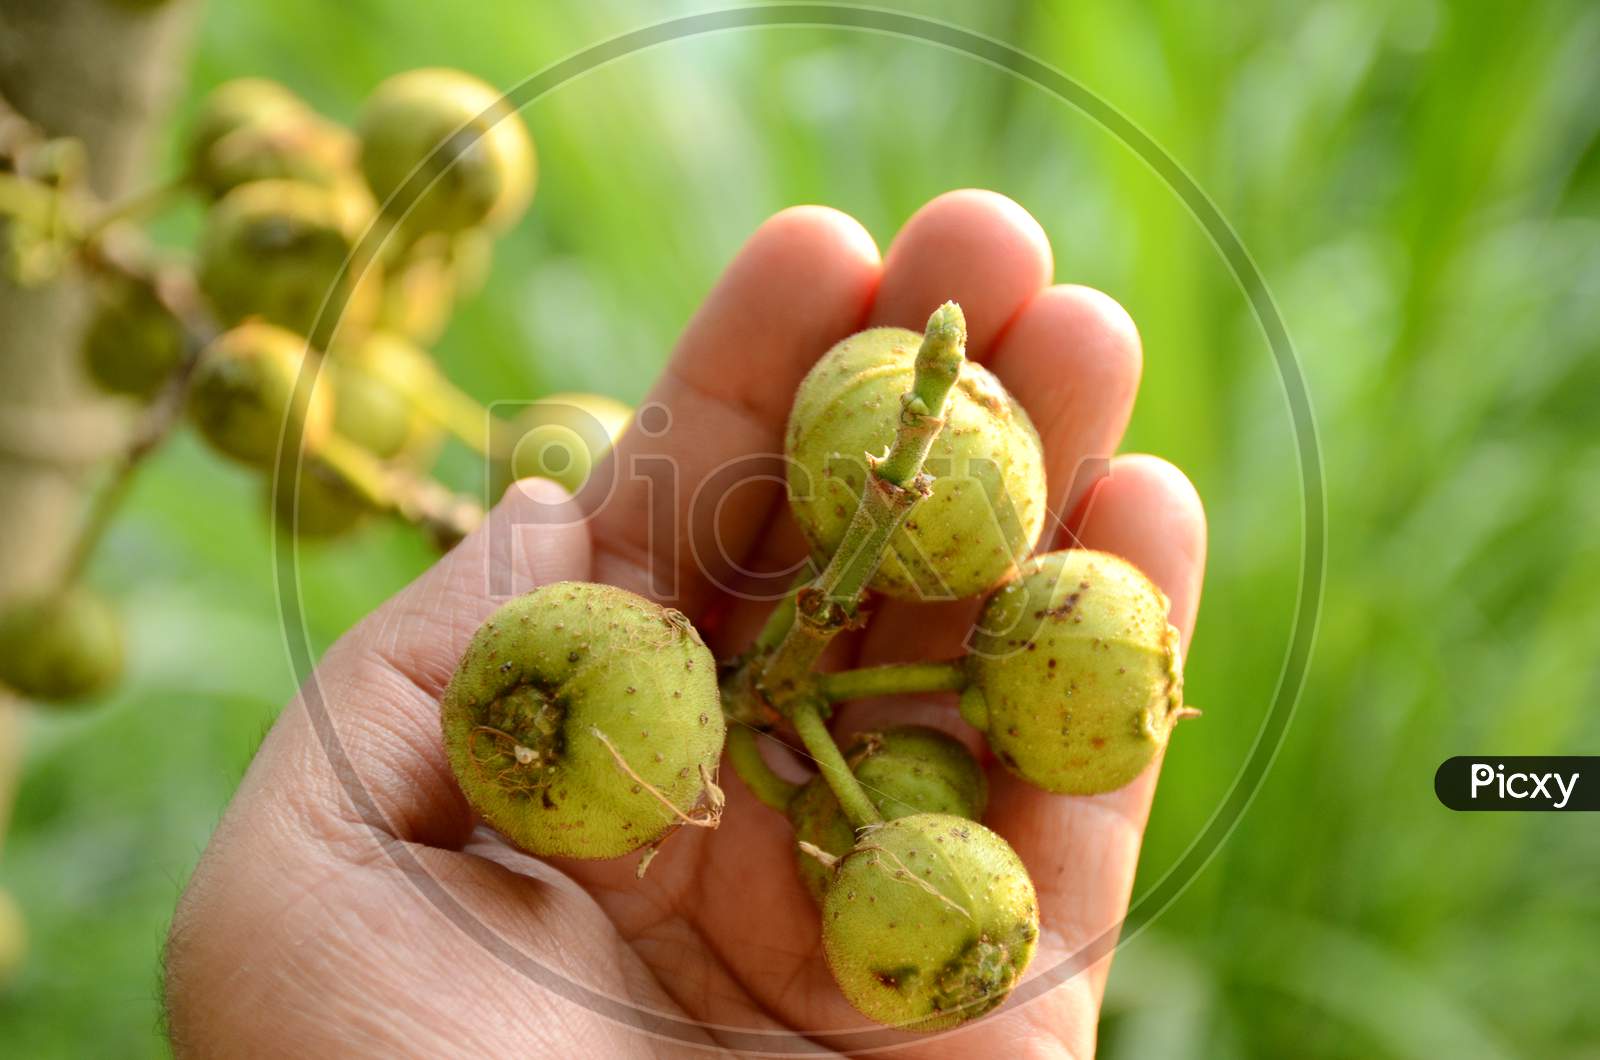 Closeup The Bunch Ripe Yellow Green Tree Fruit Hold Hand With Leaves And Branch Growing In The Forest Over Out Of Focus Green Background.